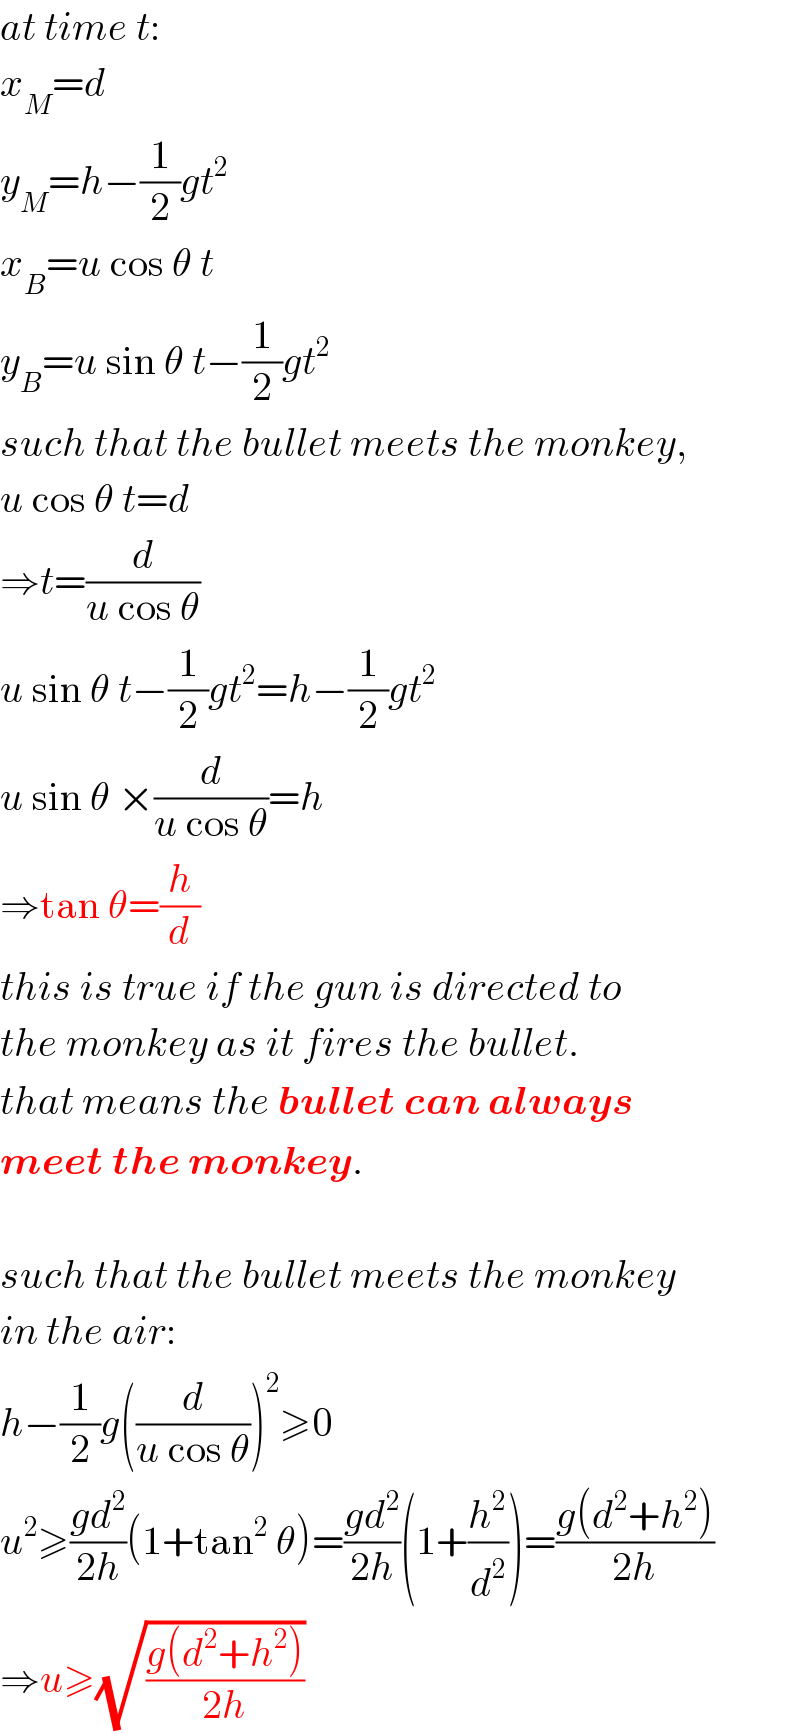 at time t:  x_M =d  y_M =h−(1/2)gt^2   x_B =u cos θ t  y_B =u sin θ t−(1/2)gt^2   such that the bullet meets the monkey,  u cos θ t=d  ⇒t=(d/(u cos θ))  u sin θ t−(1/2)gt^2 =h−(1/2)gt^2   u sin θ ×(d/(u cos θ))=h  ⇒tan θ=(h/d)  this is true if the gun is directed to  the monkey as it fires the bullet.  that means the bullet can always   meet the monkey.    such that the bullet meets the monkey  in the air:  h−(1/2)g((d/(u cos θ)))^2 ≥0  u^2 ≥((gd^2 )/(2h))(1+tan^2  θ)=((gd^2 )/(2h))(1+(h^2 /d^2 ))=((g(d^2 +h^2 ))/(2h))  ⇒u≥(√((g(d^2 +h^2 ))/(2h)))  